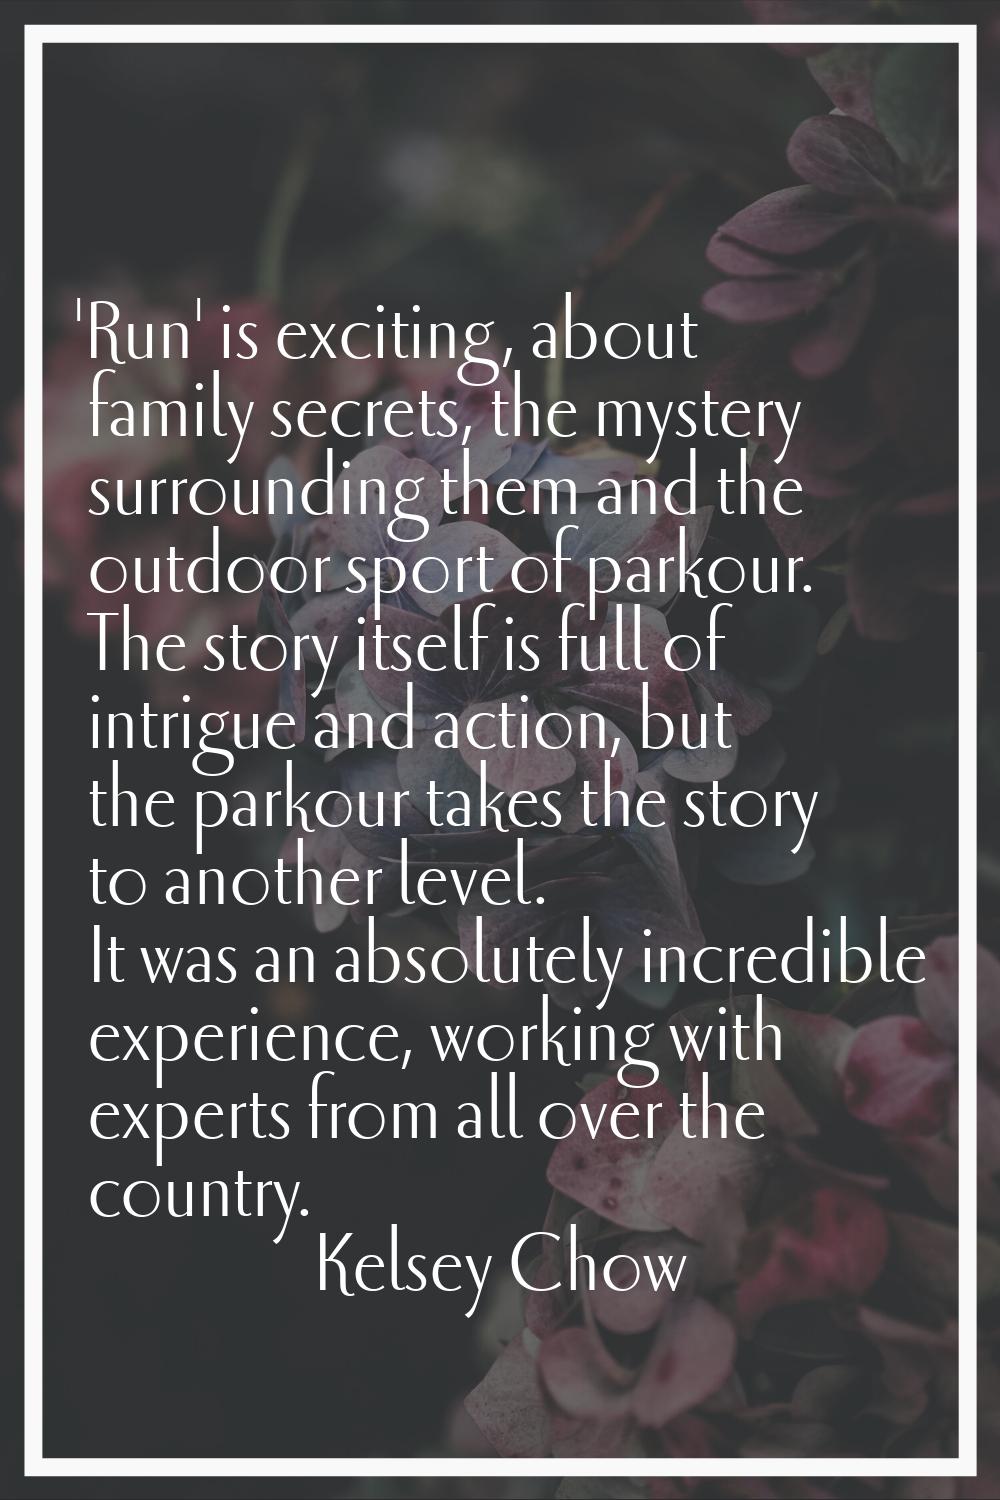 'Run' is exciting, about family secrets, the mystery surrounding them and the outdoor sport of park